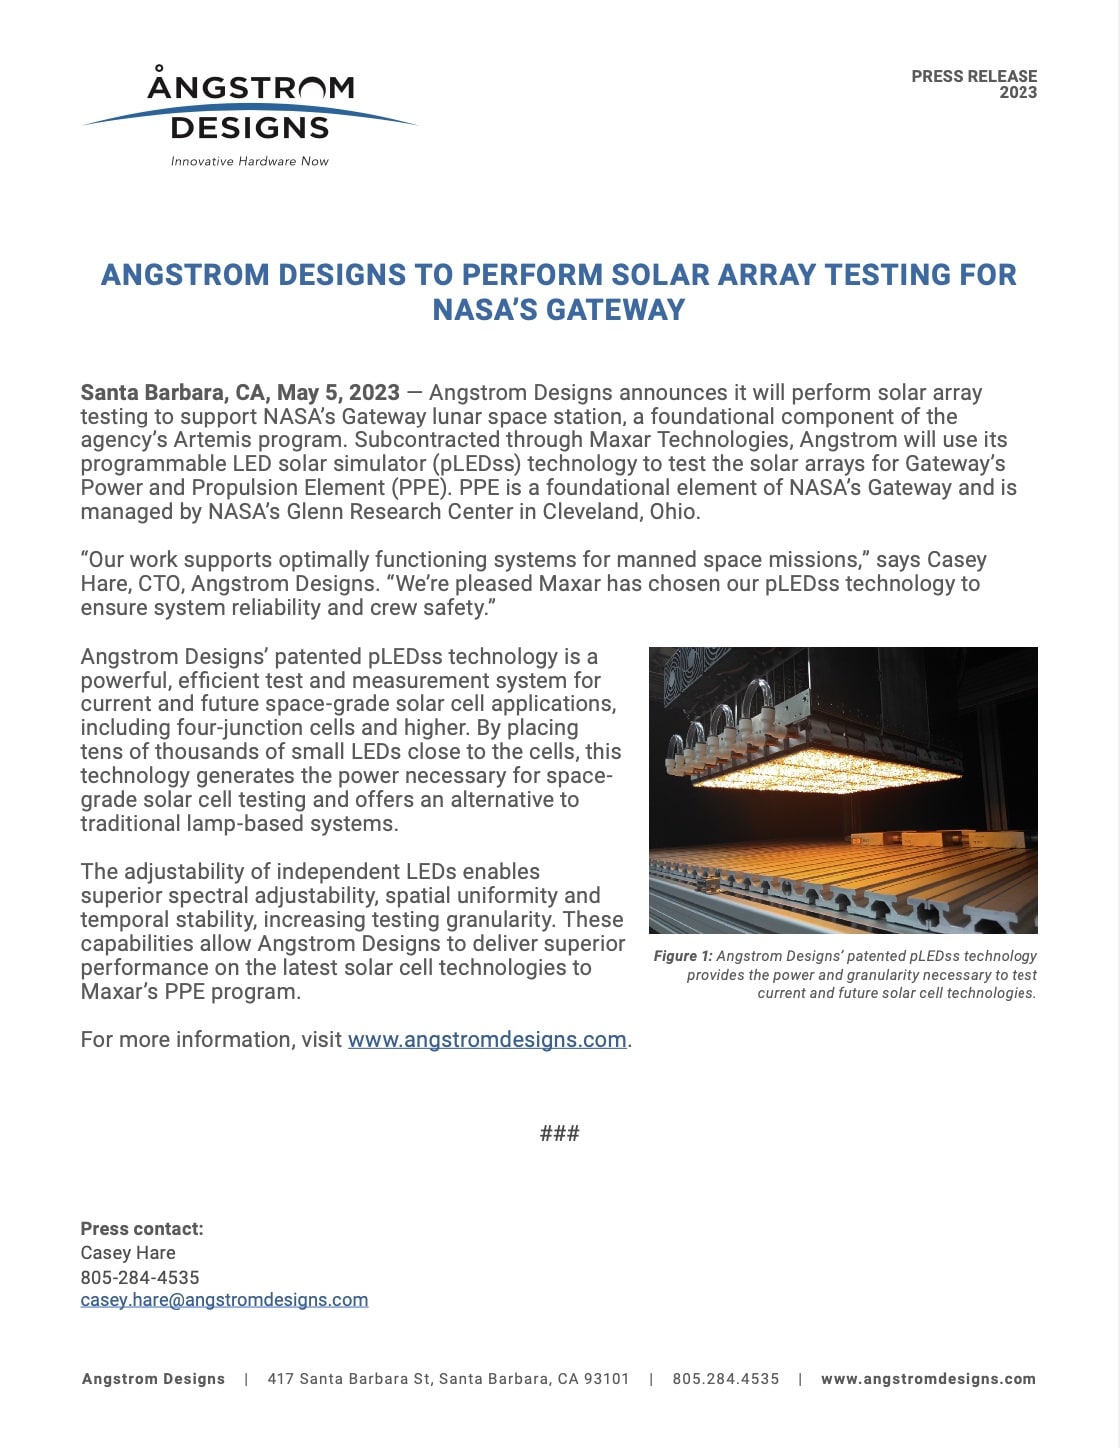 Angstrom Designs to Perform Solar Array Testing for NASA's Gateway